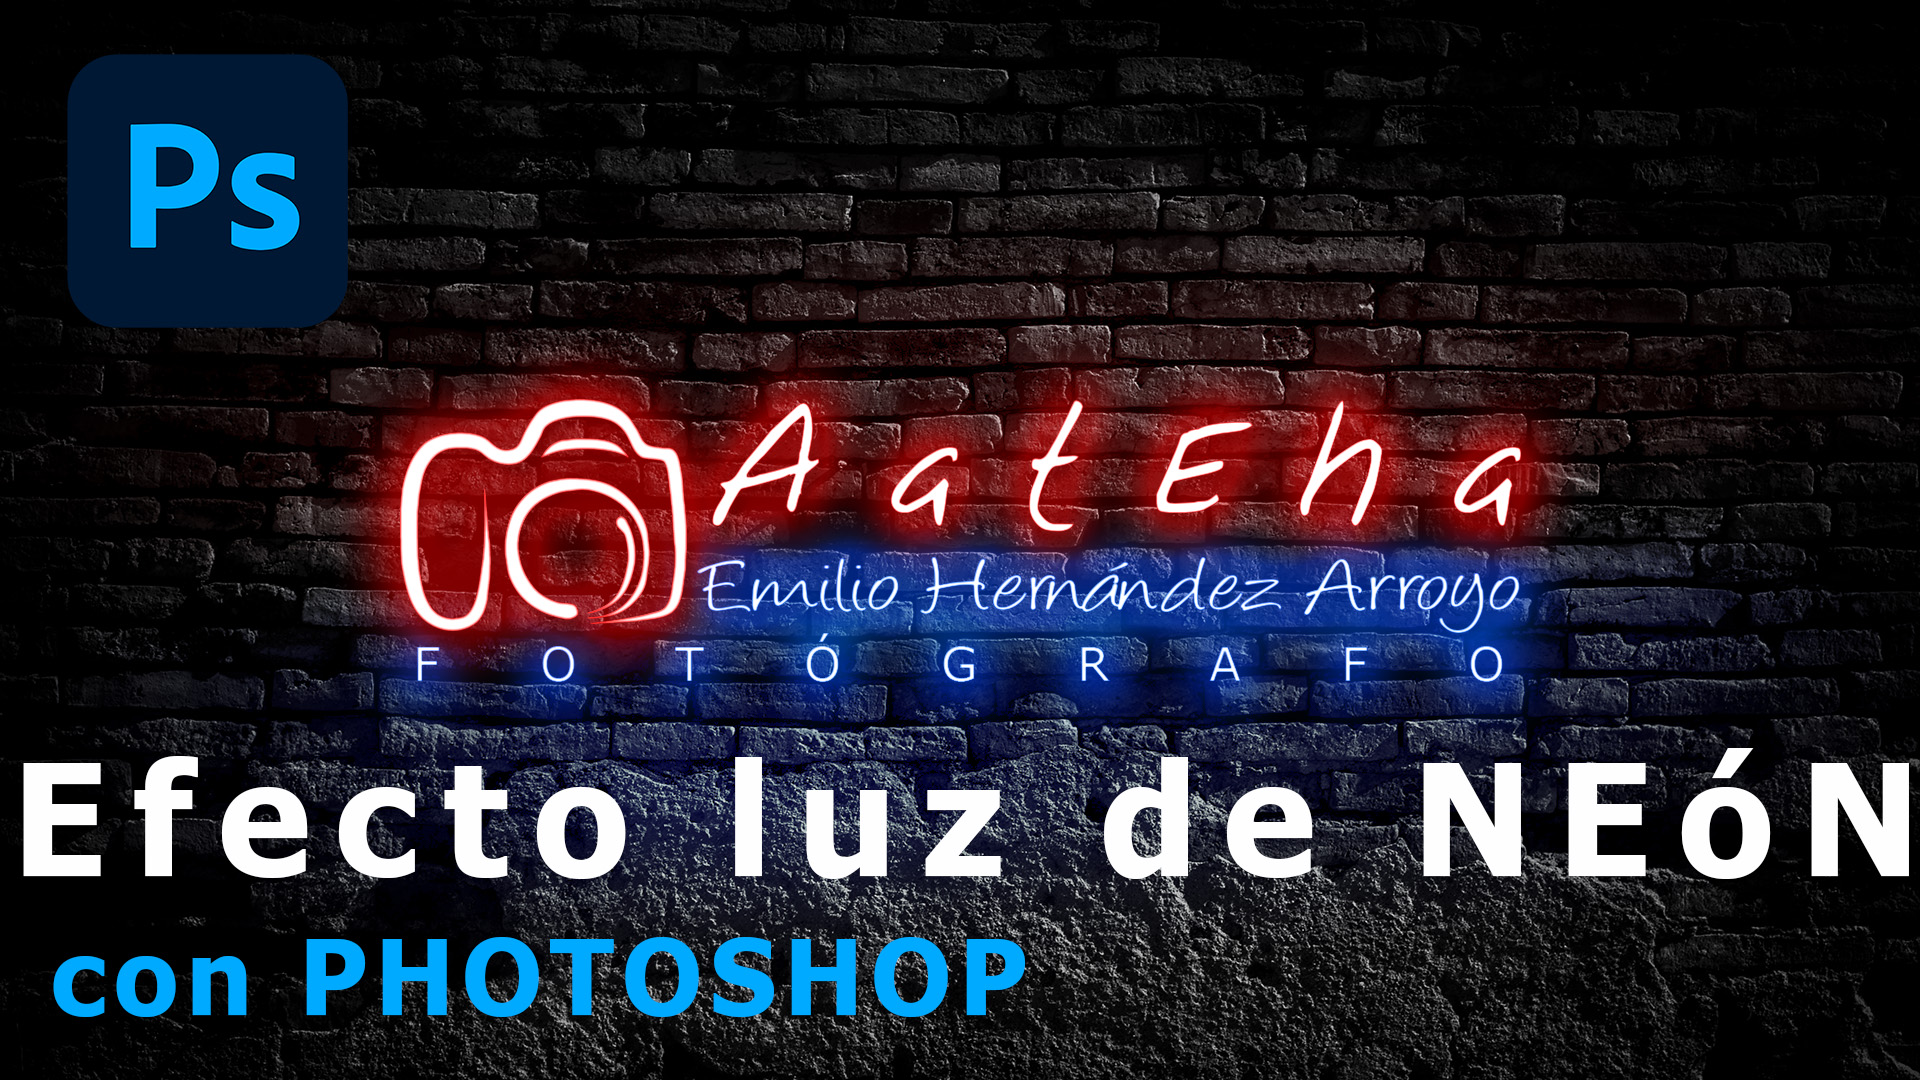 Simulate the neon light effect with Photoshop